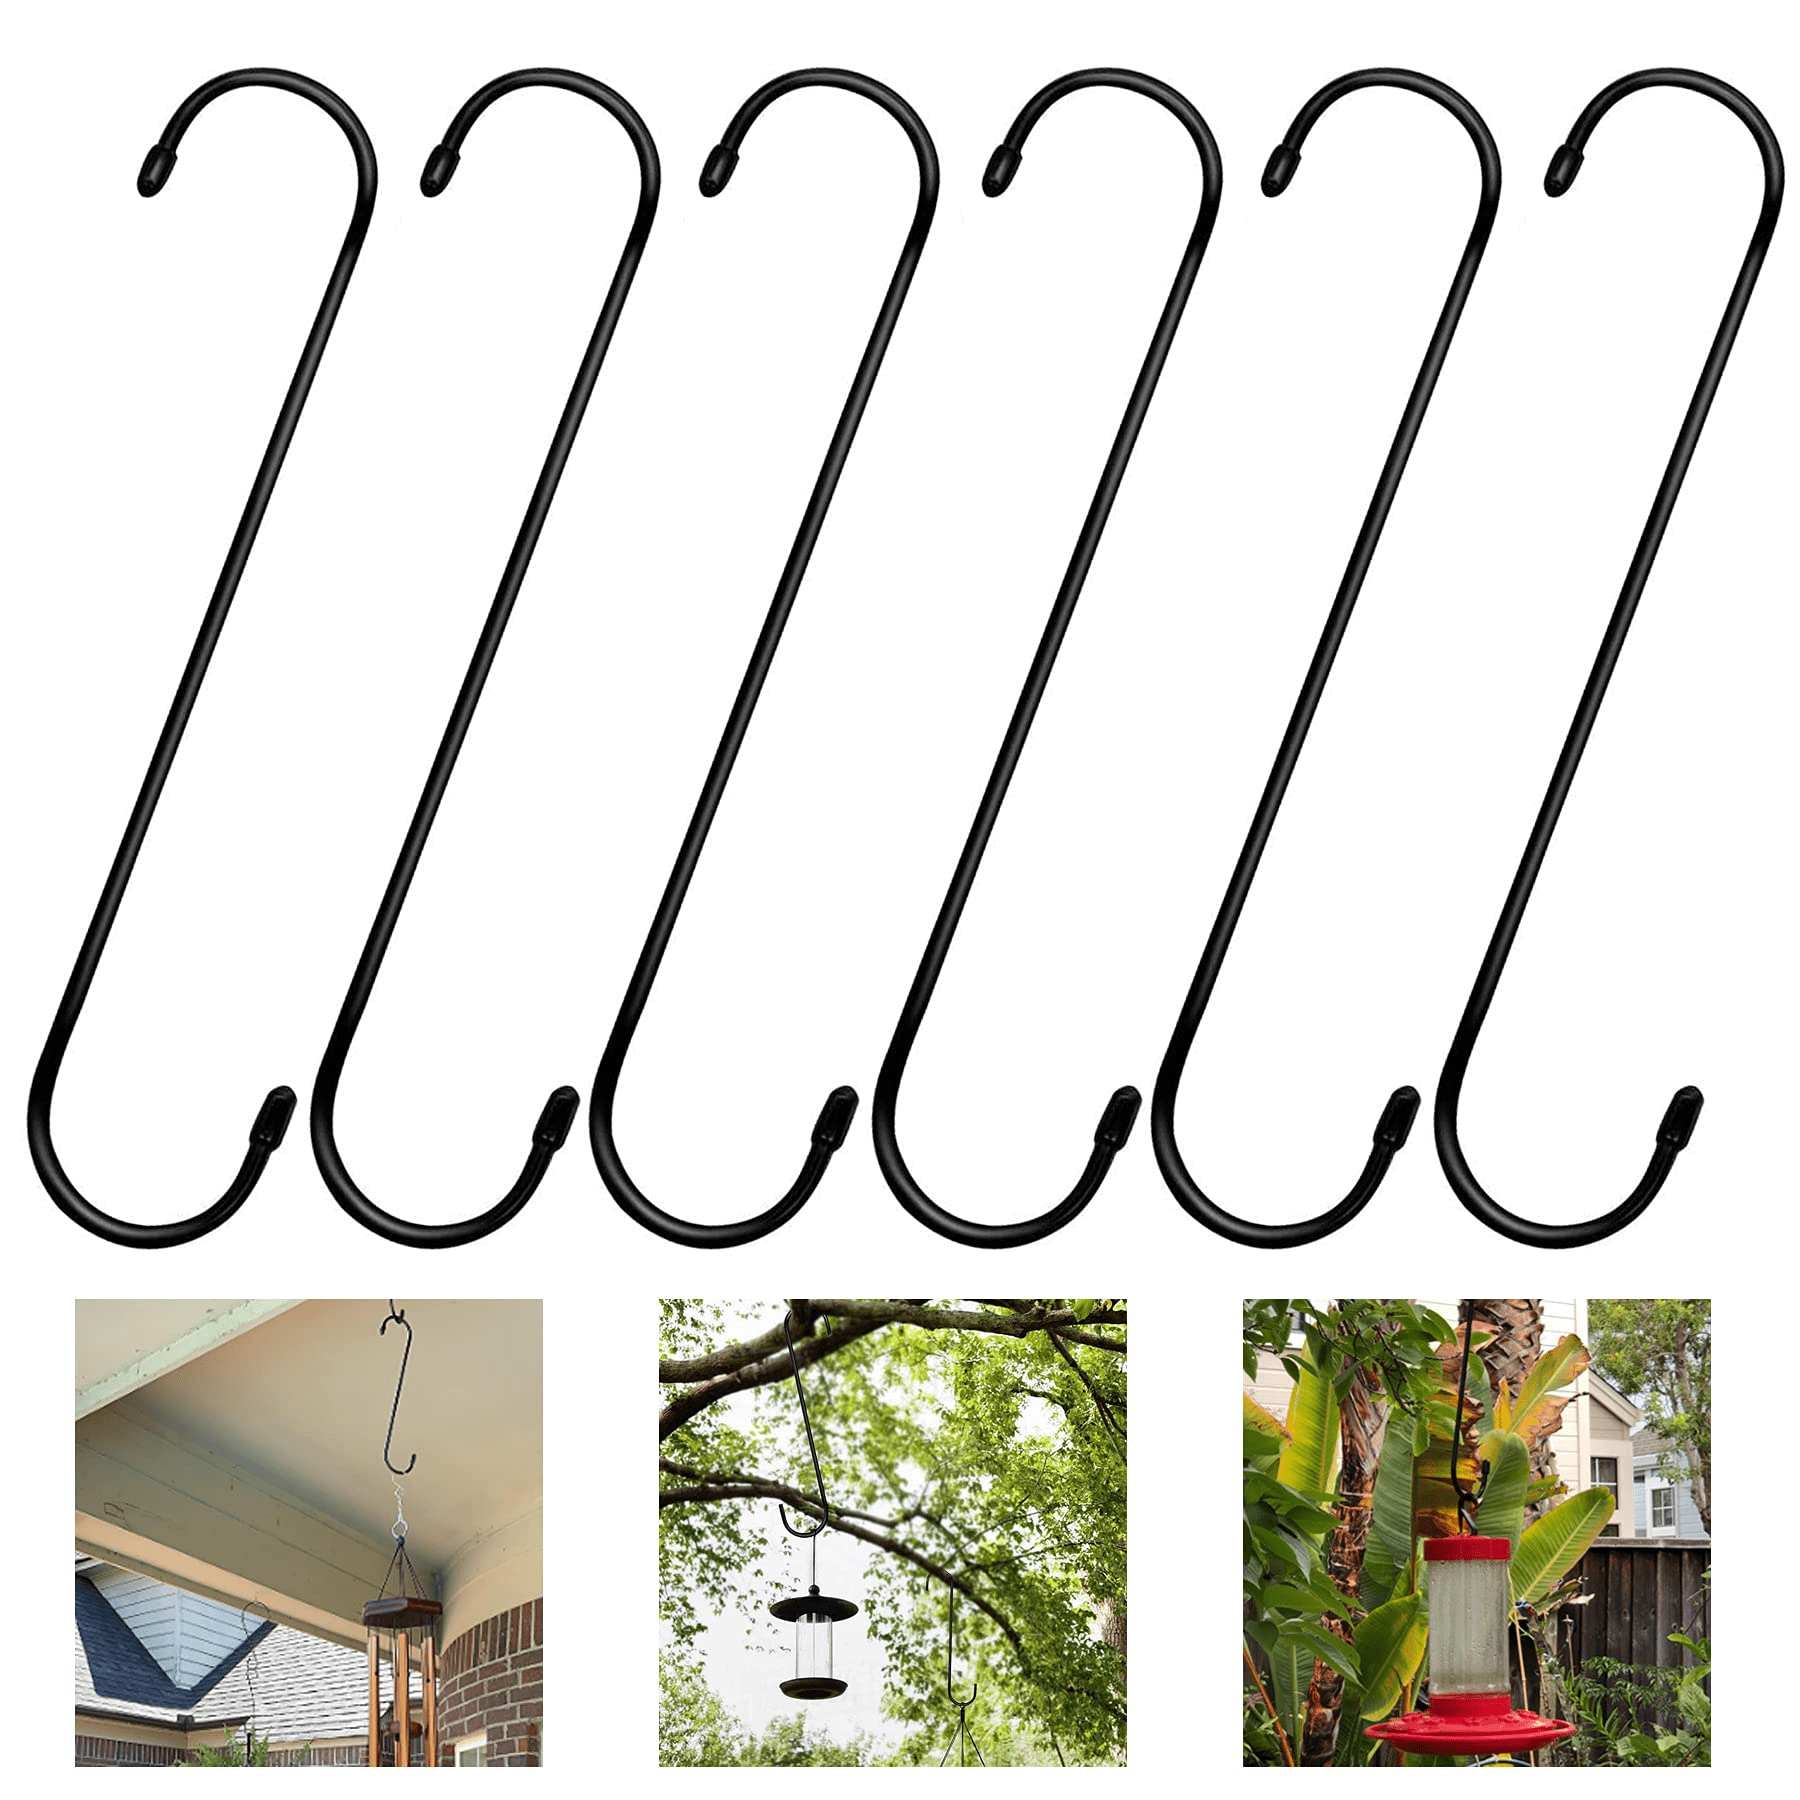 Clothes. RuiLing 4 Gardening Tools Wardrobe Pots Utensils Plants Pack Extra Large 10Black Antistatic Coating Steel Hanging Hooks S Shaped Heavy-Duty S Type Hooks,Best for Kitchenware 